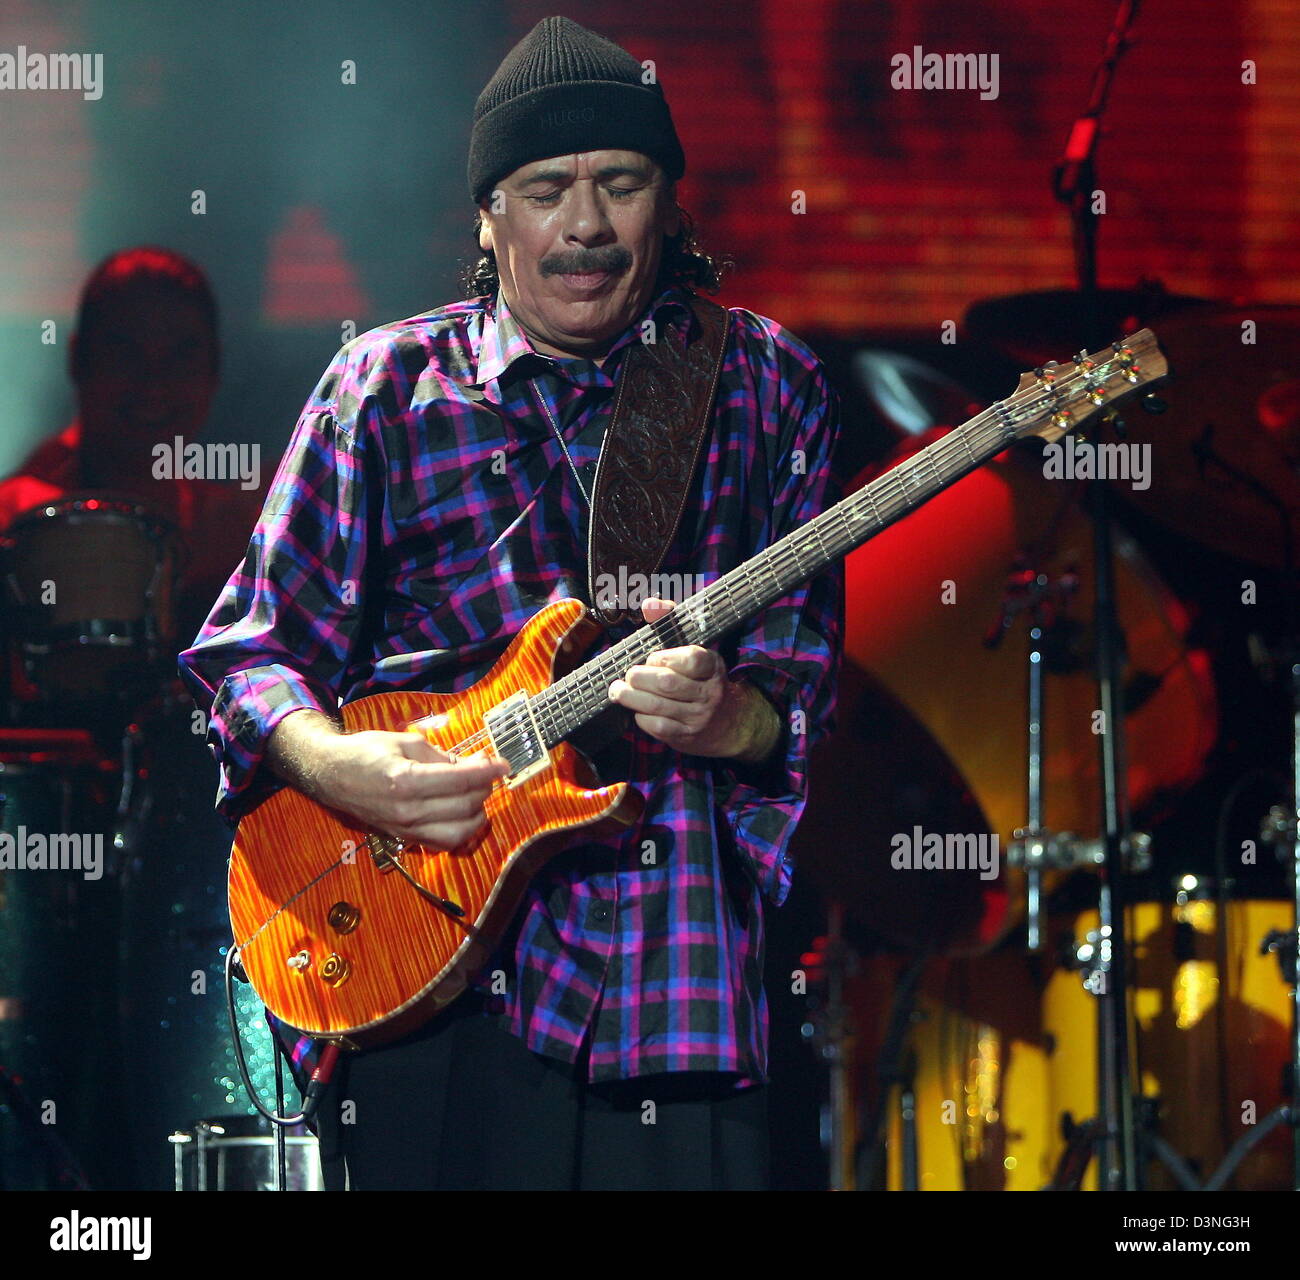 Mexican superstar guitarist Carlos Santana plays his guitar in the Color  Line Arena in Hamburg, Germany, 5 May 2006. Santana (58) started his  European tour with 9,000 fans. The 'All That I